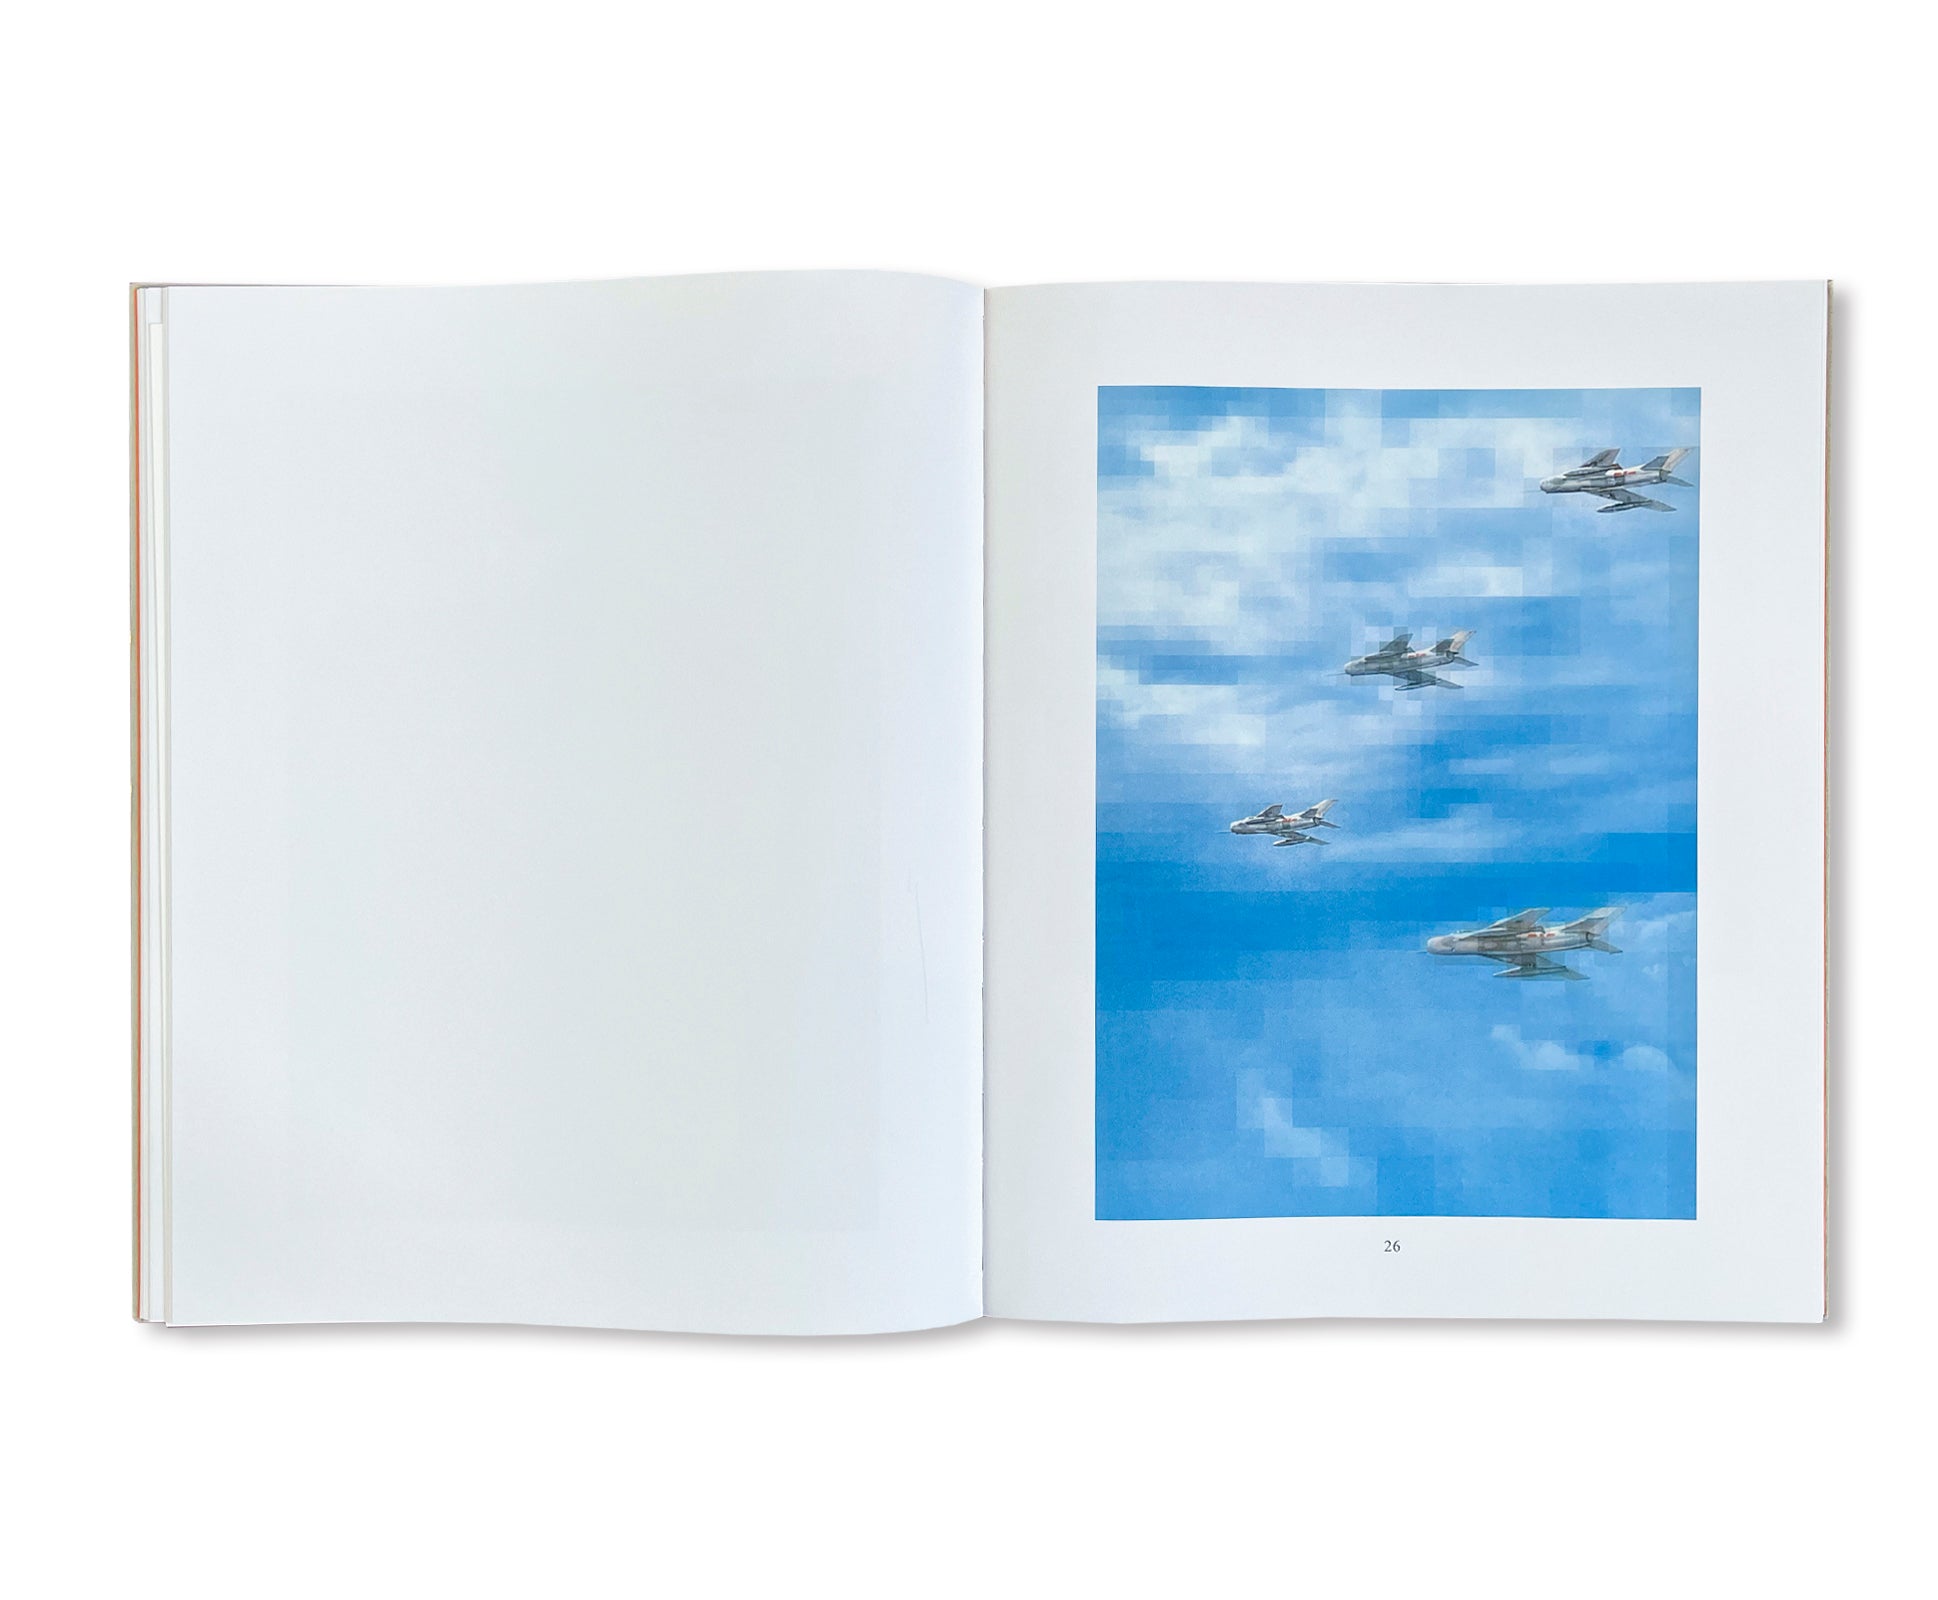 TABLEAUX CHINOIS by Thomas Ruff [SPECIAL EDITION (FLIEGER)]